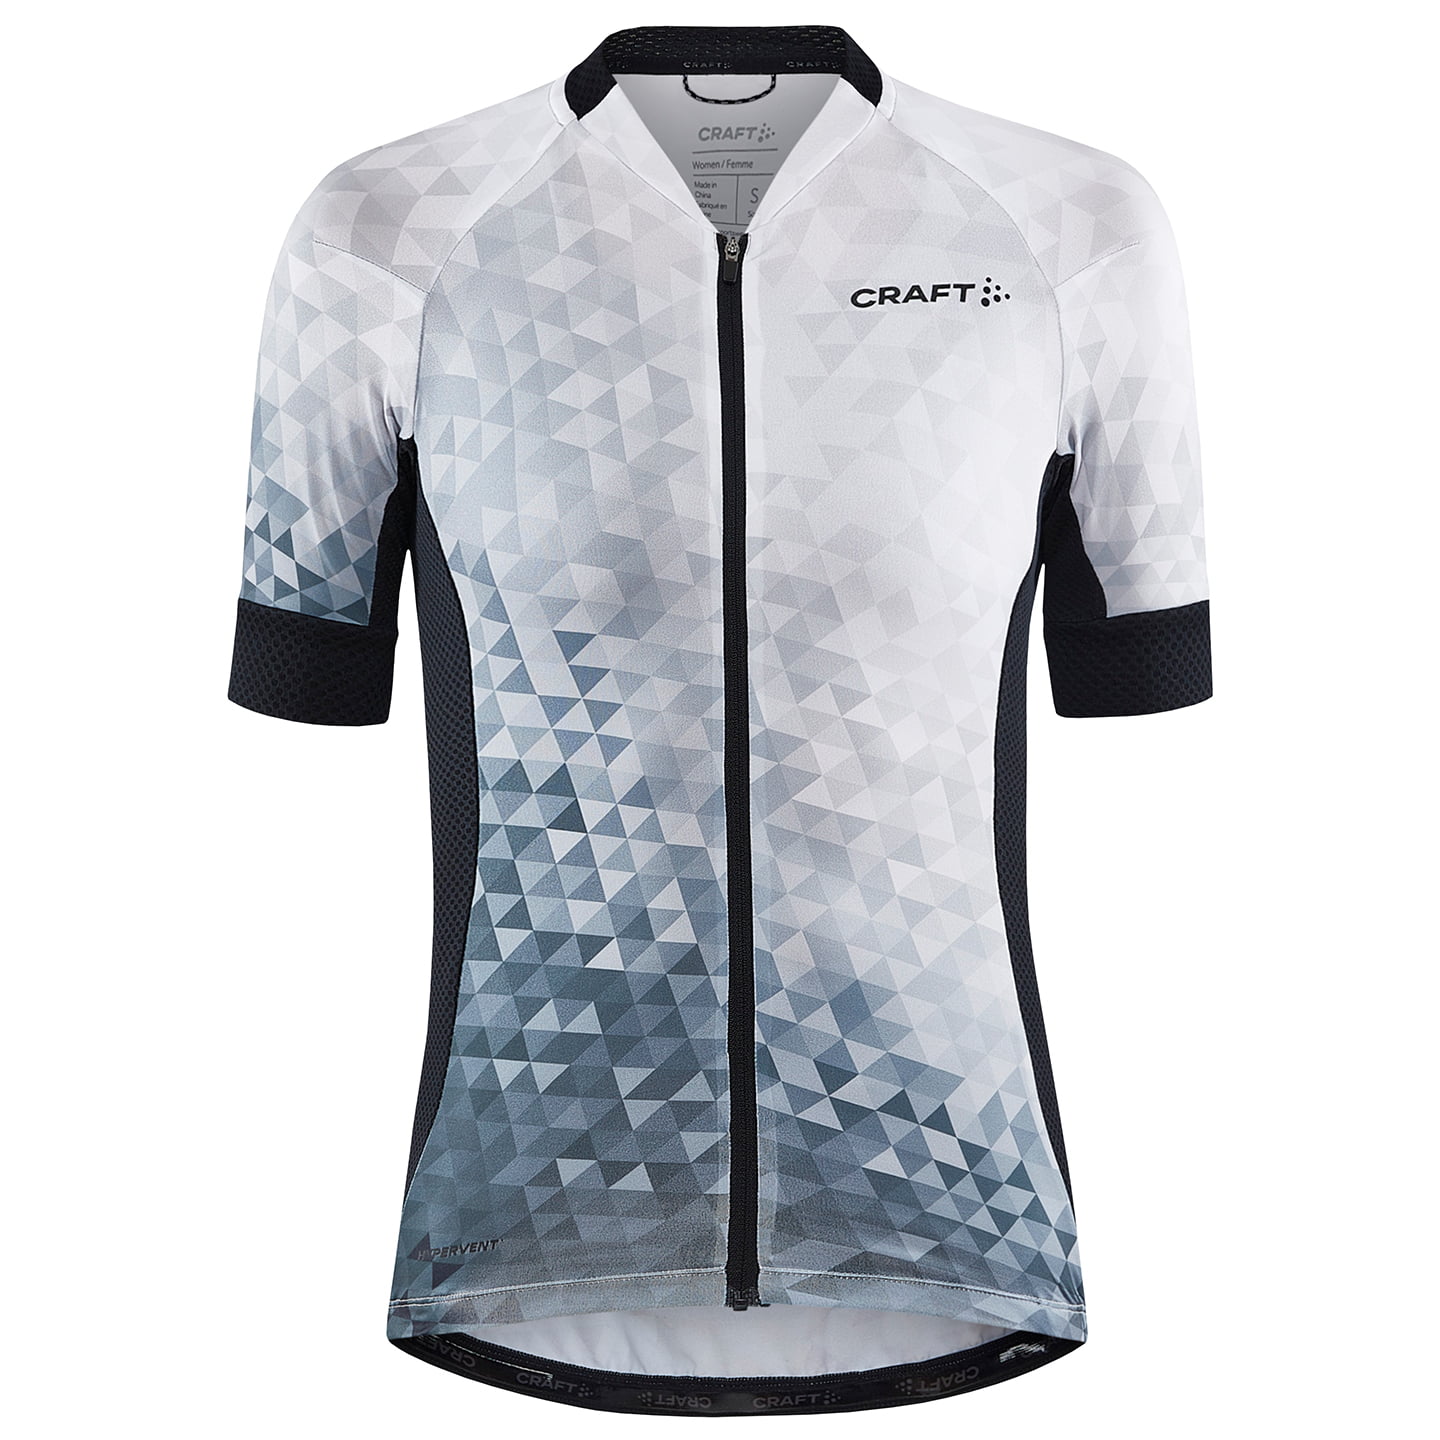 CRAFT ADV Endur Graphic Women’s Jersey Women’s Short Sleeve Jersey, size L, Cycling jersey, Cycling clothing